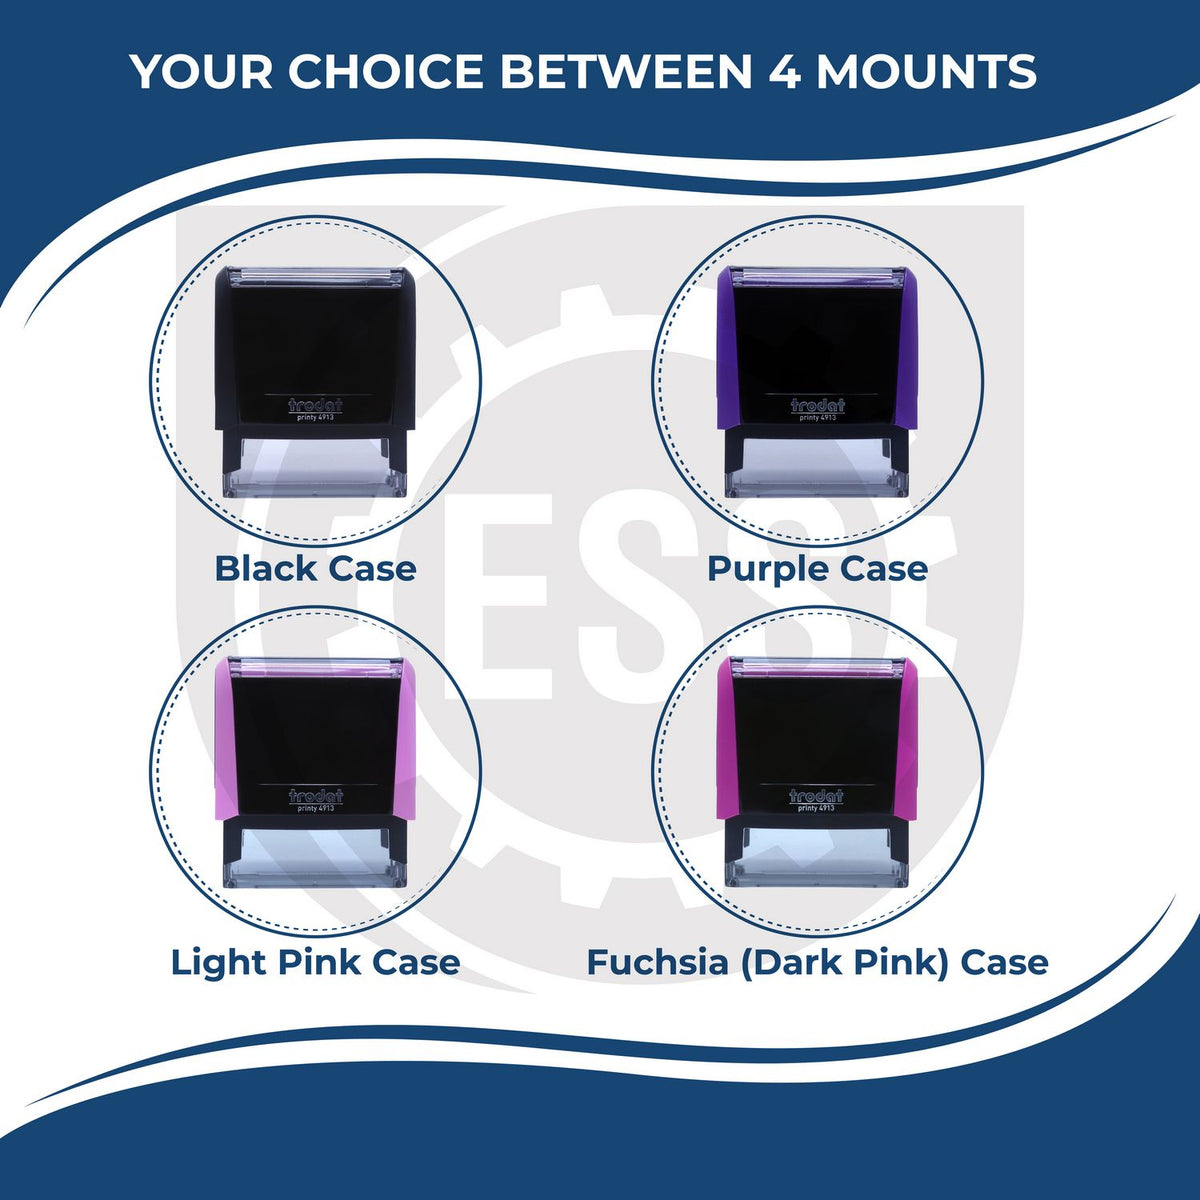 A picture of different colored mounts for the Self-Inking State Seal Massachusetts Notary Stamp featurning a Red, Blue or Black Mount